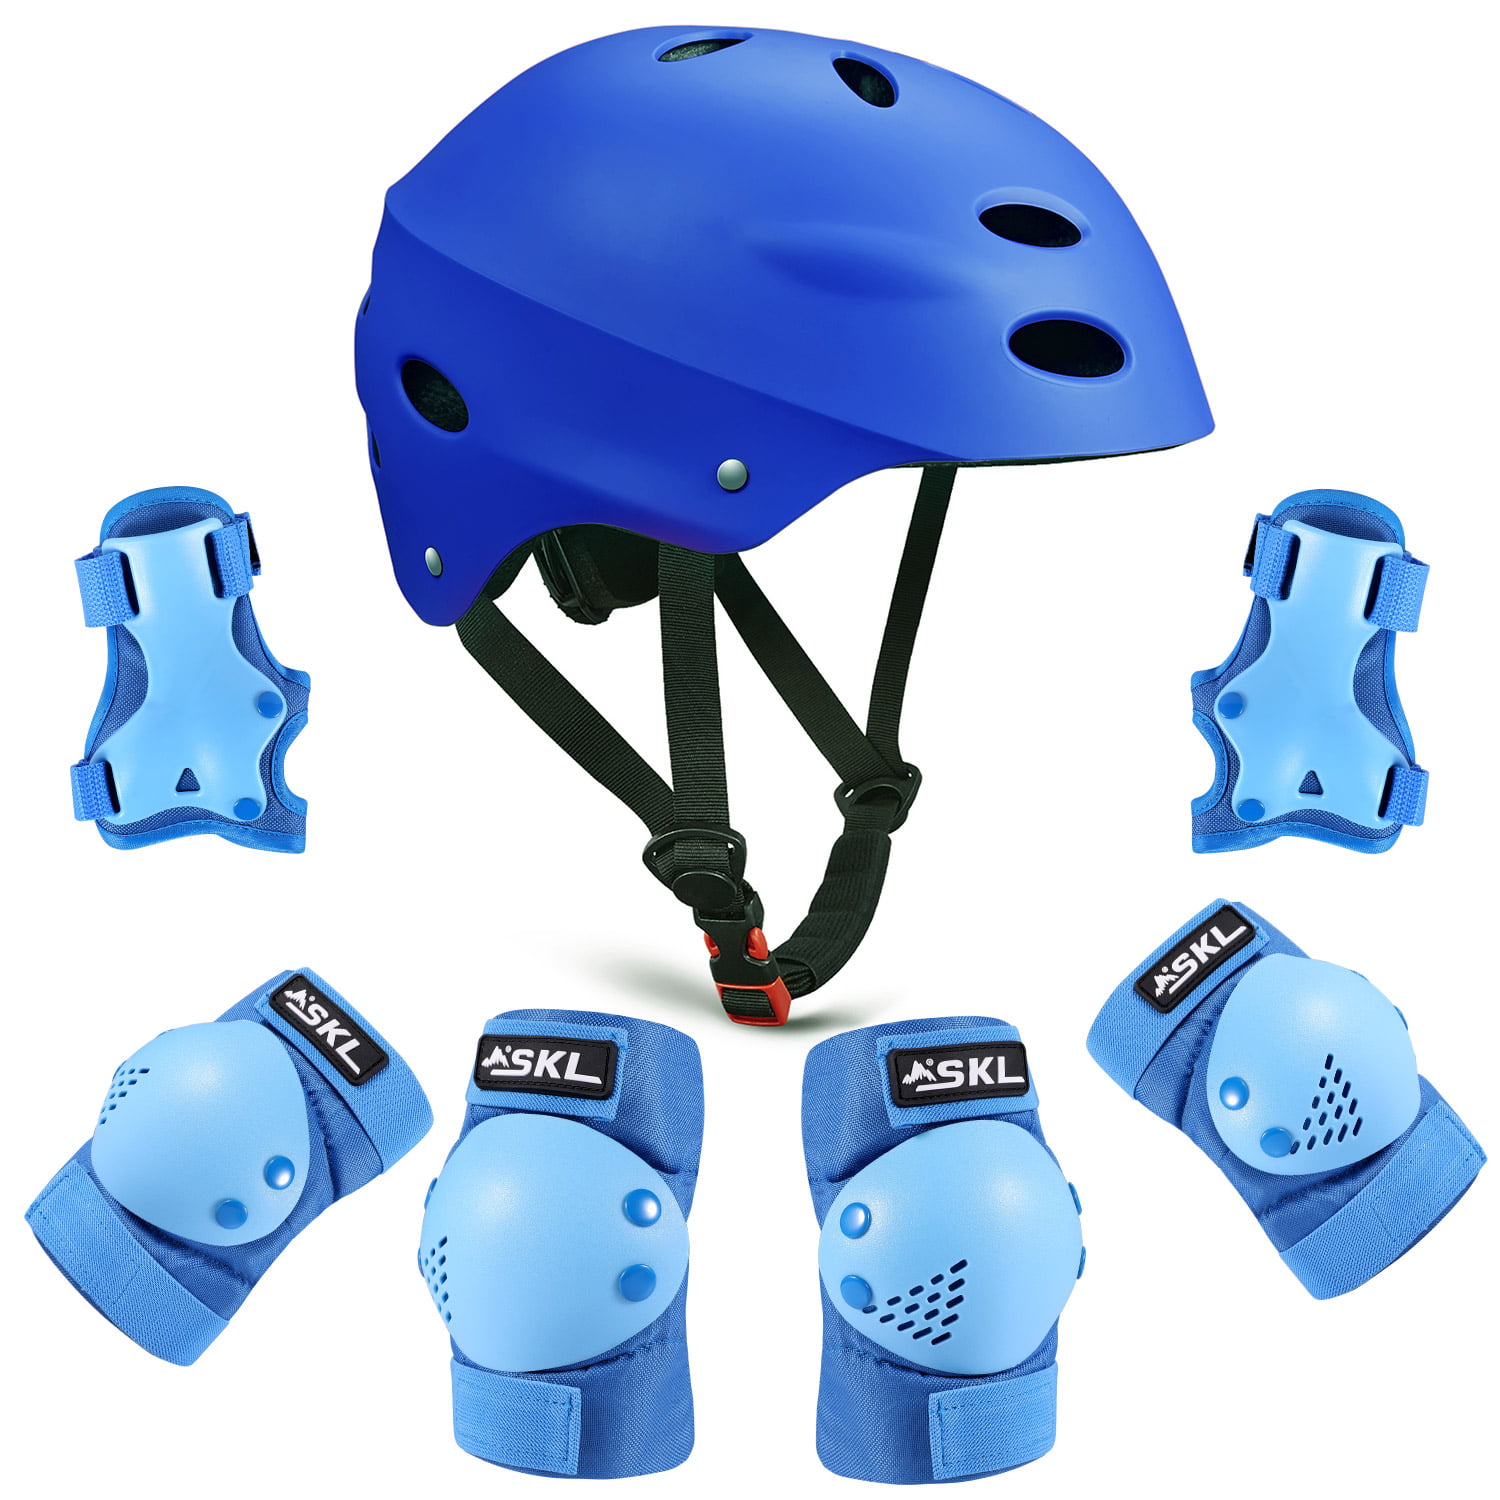 Biking Child/Adults Bike Helmet Protection Gear Set for Multi Sports Scooter PHZ Skateboarding Protection for Beginner to Advanced Roller Skating Knee and Elbow Pads with Wrist Guards Helmet